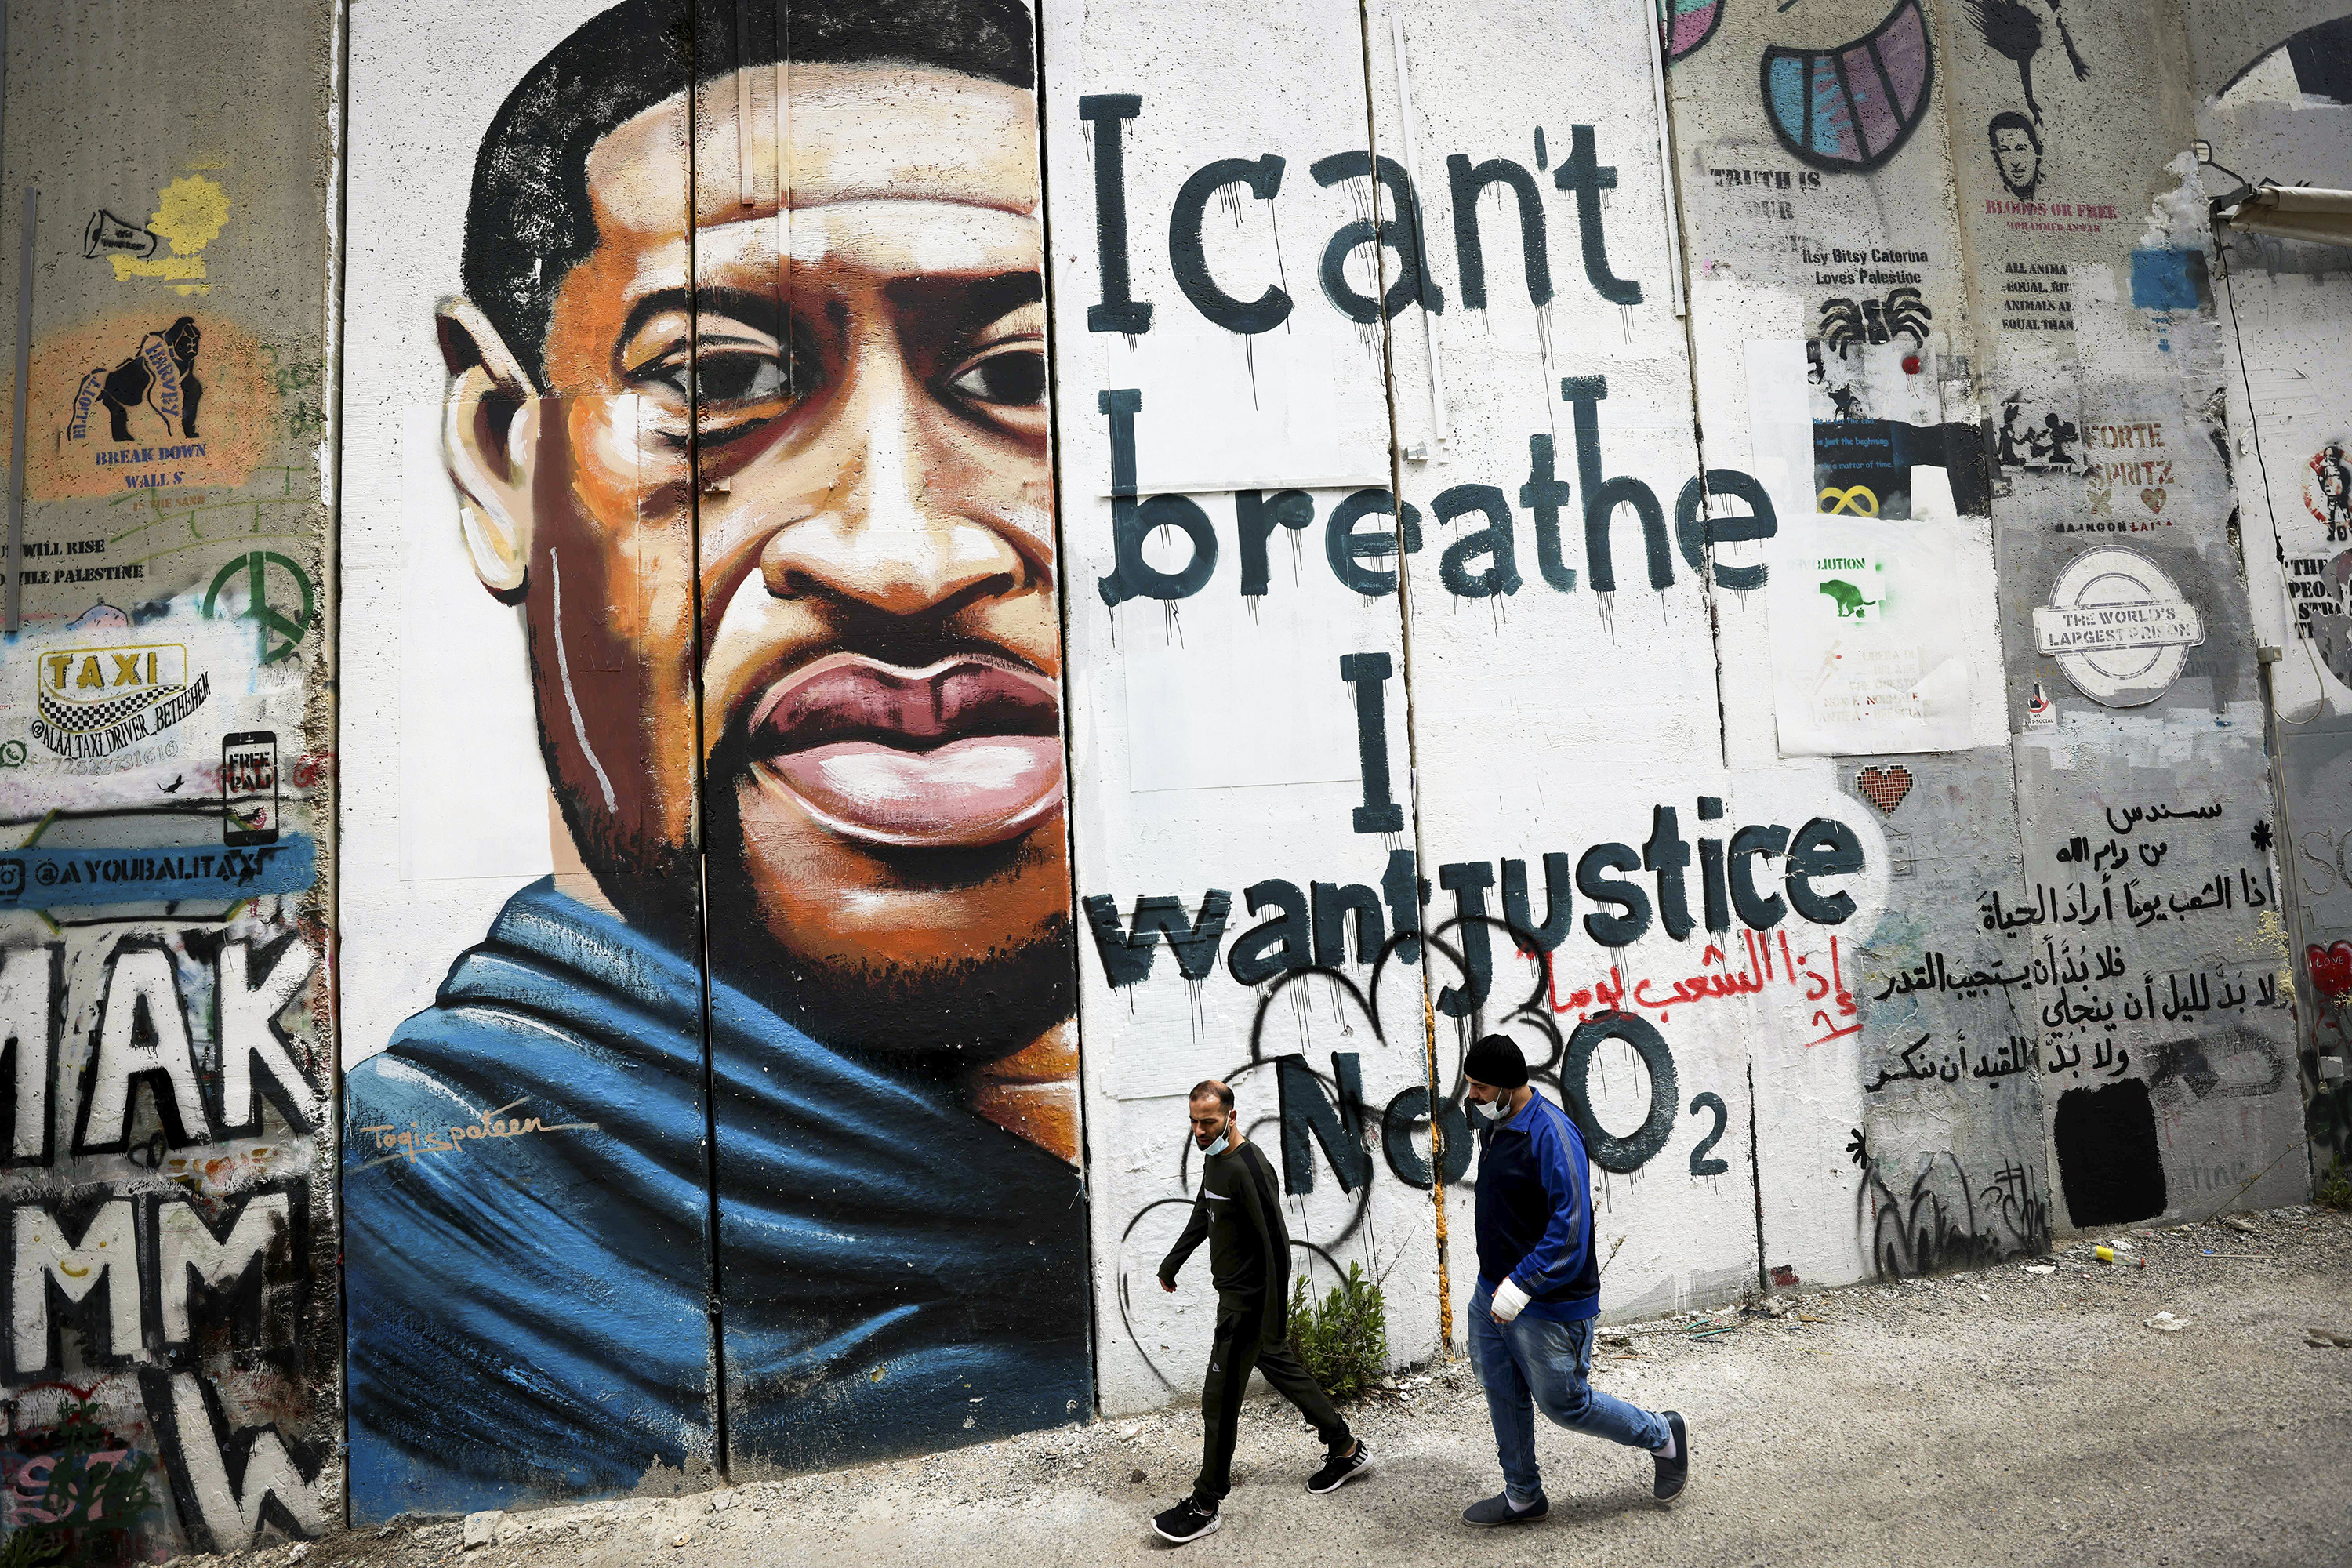 A George Floyd mural in Bethlehem features a picture of Floyd and the words, “I can’t breathe, I want justice not O2.”